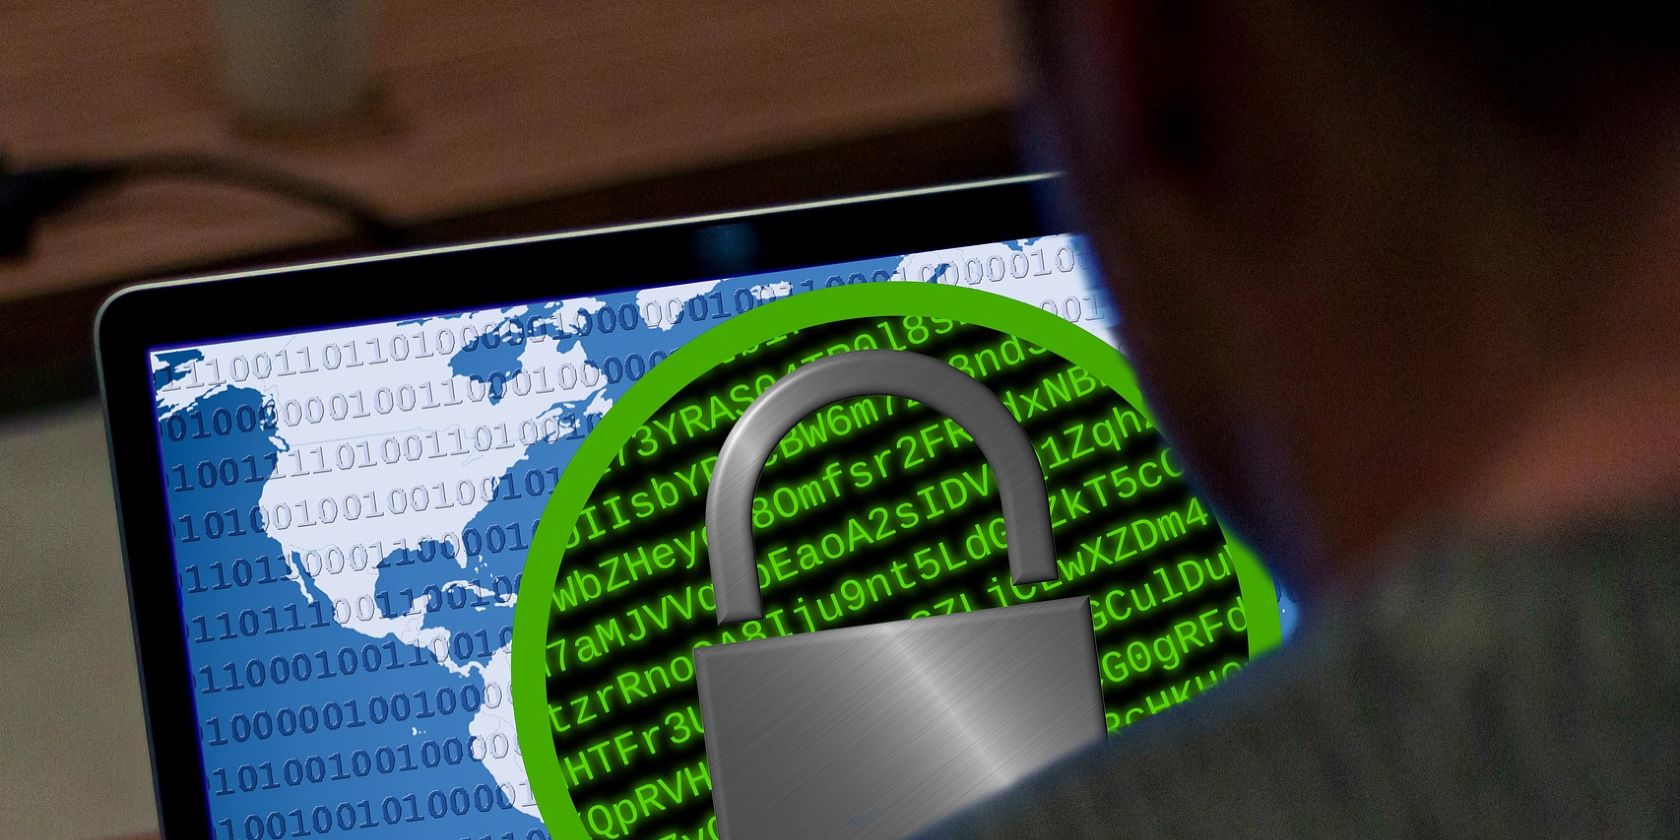 Stock photo shows a man looking at a computer screen with the lock symbol, illustrating a ransomware attack.